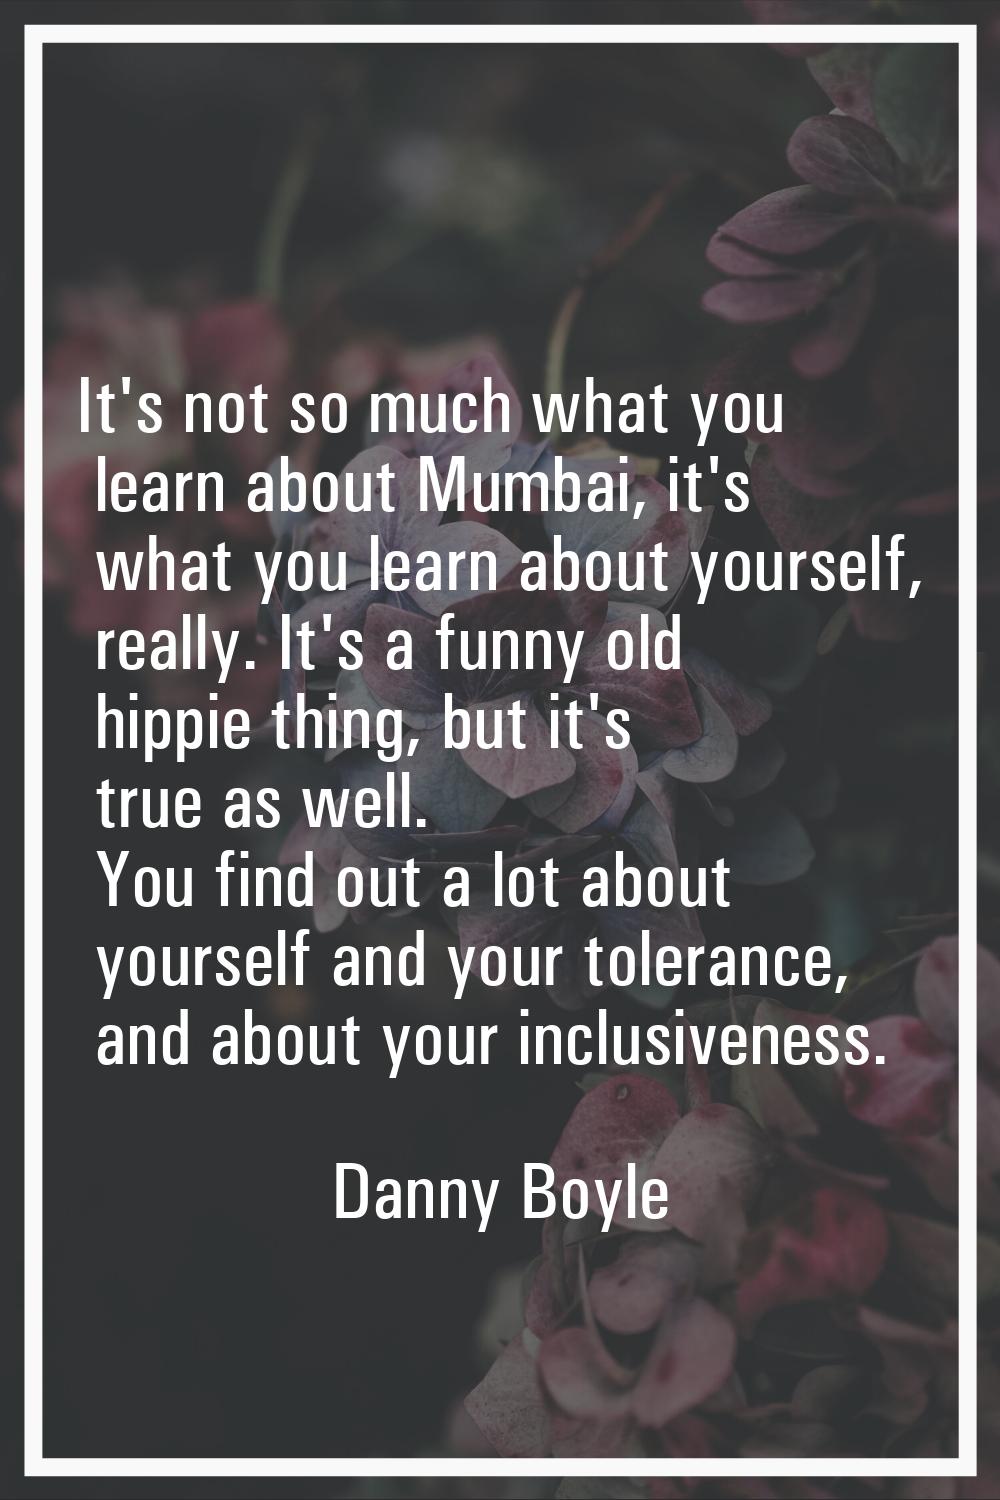 It's not so much what you learn about Mumbai, it's what you learn about yourself, really. It's a fu